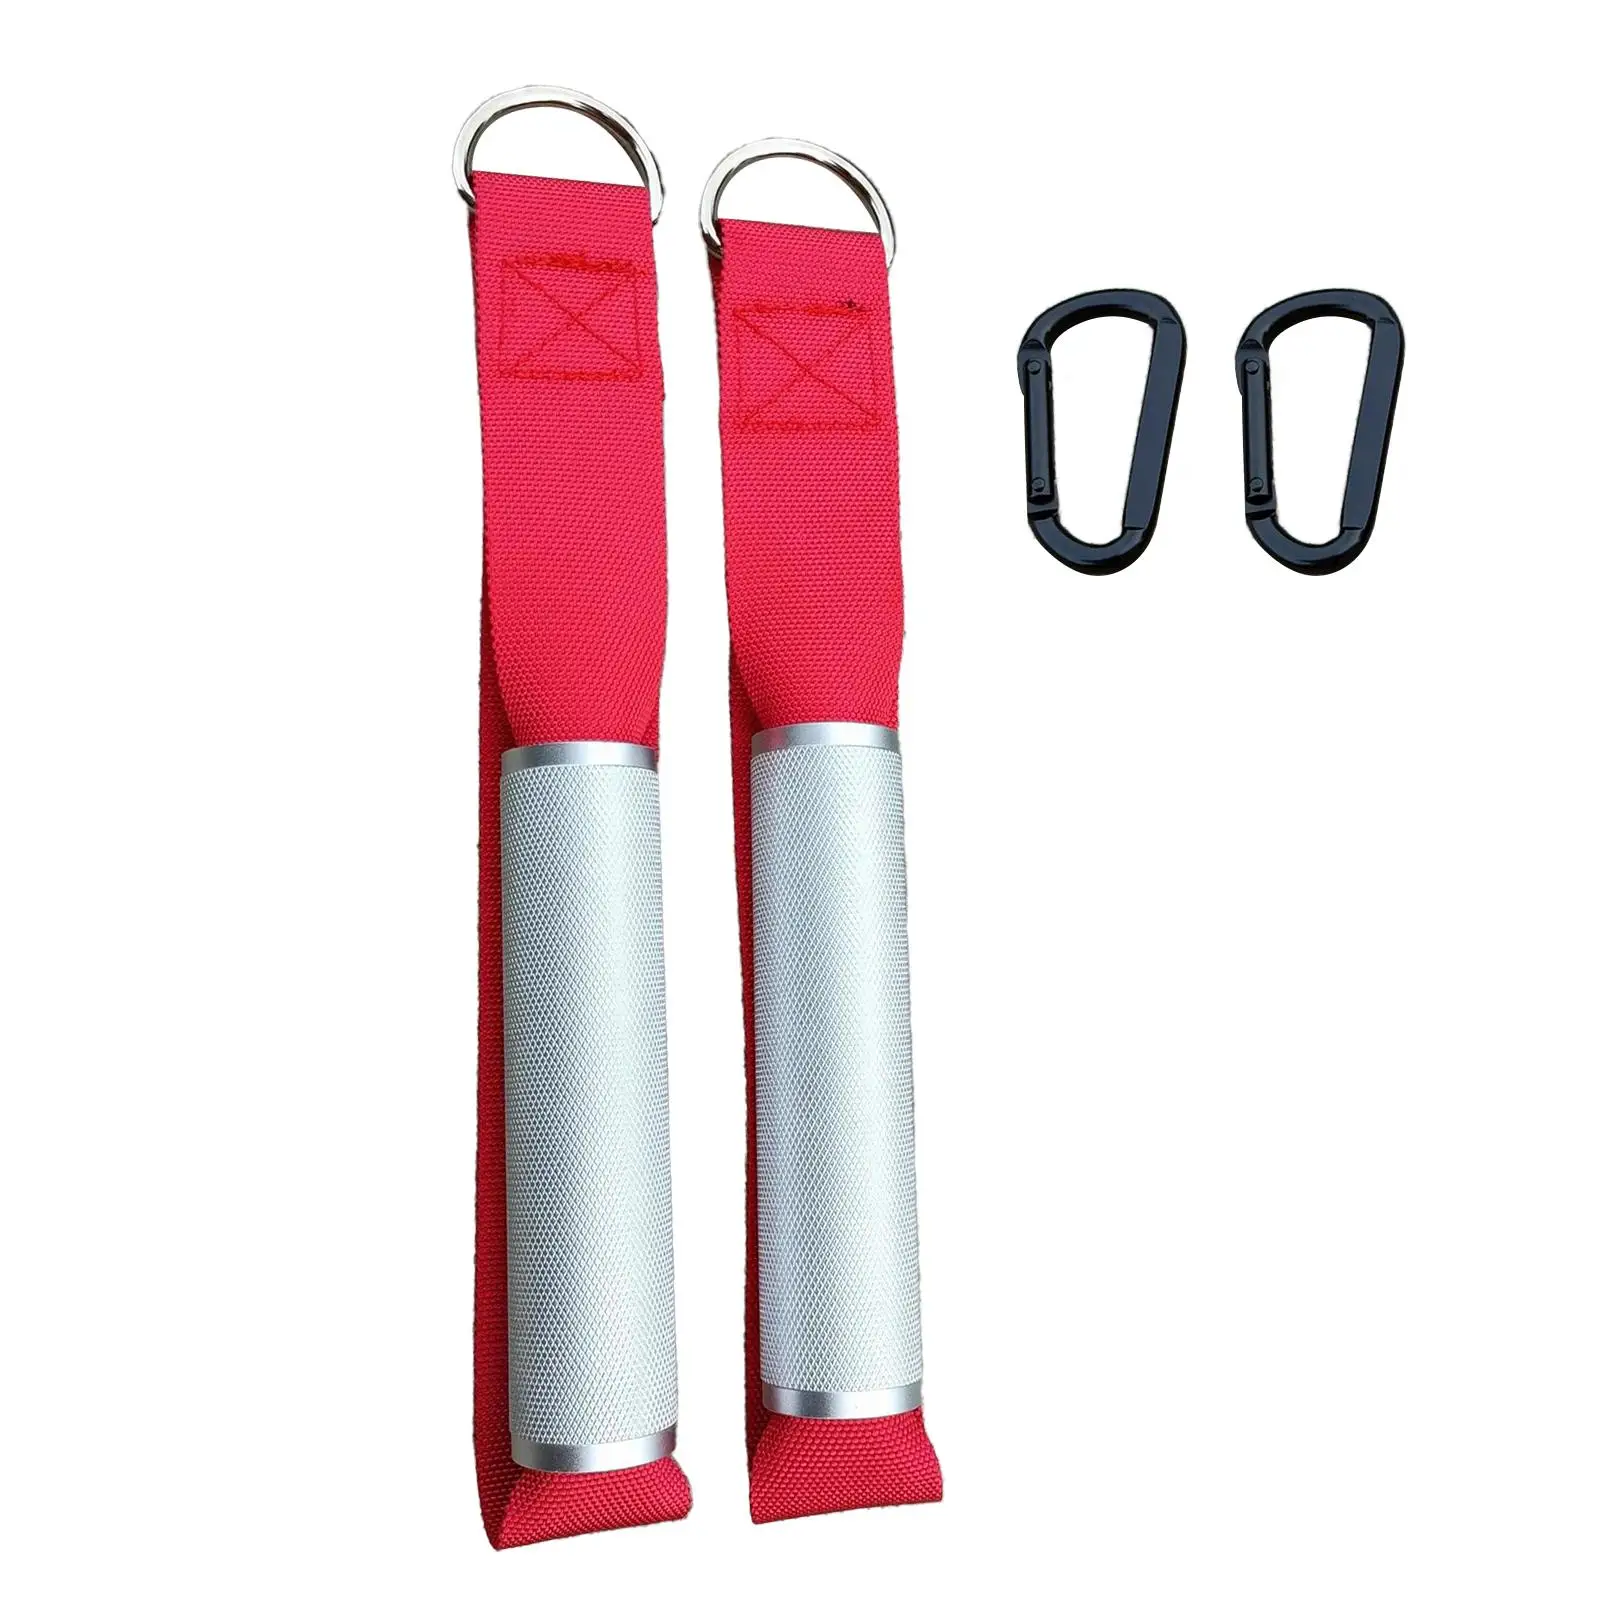 2 Pieces Gyms Handles Metal Accs Cable Attachment Gymnastics Hanging Universal Exercise Device for Strength Trainer Pilates